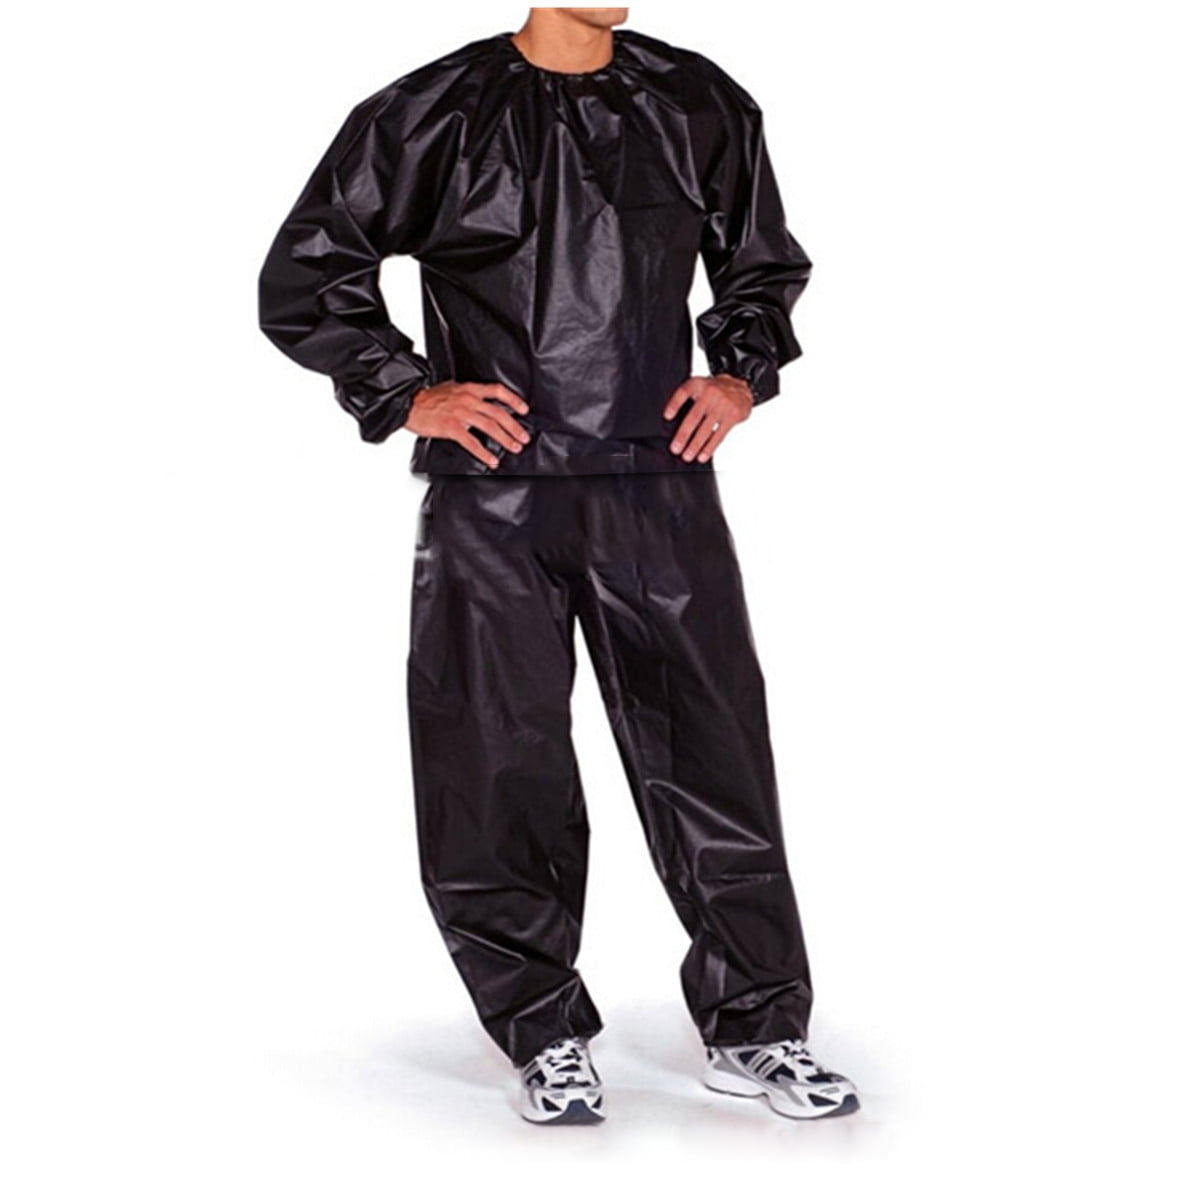 L-4XL PVC Sweat Sauna Gym Suit Fitness Loss Weight Exercise Training Tracksuit 